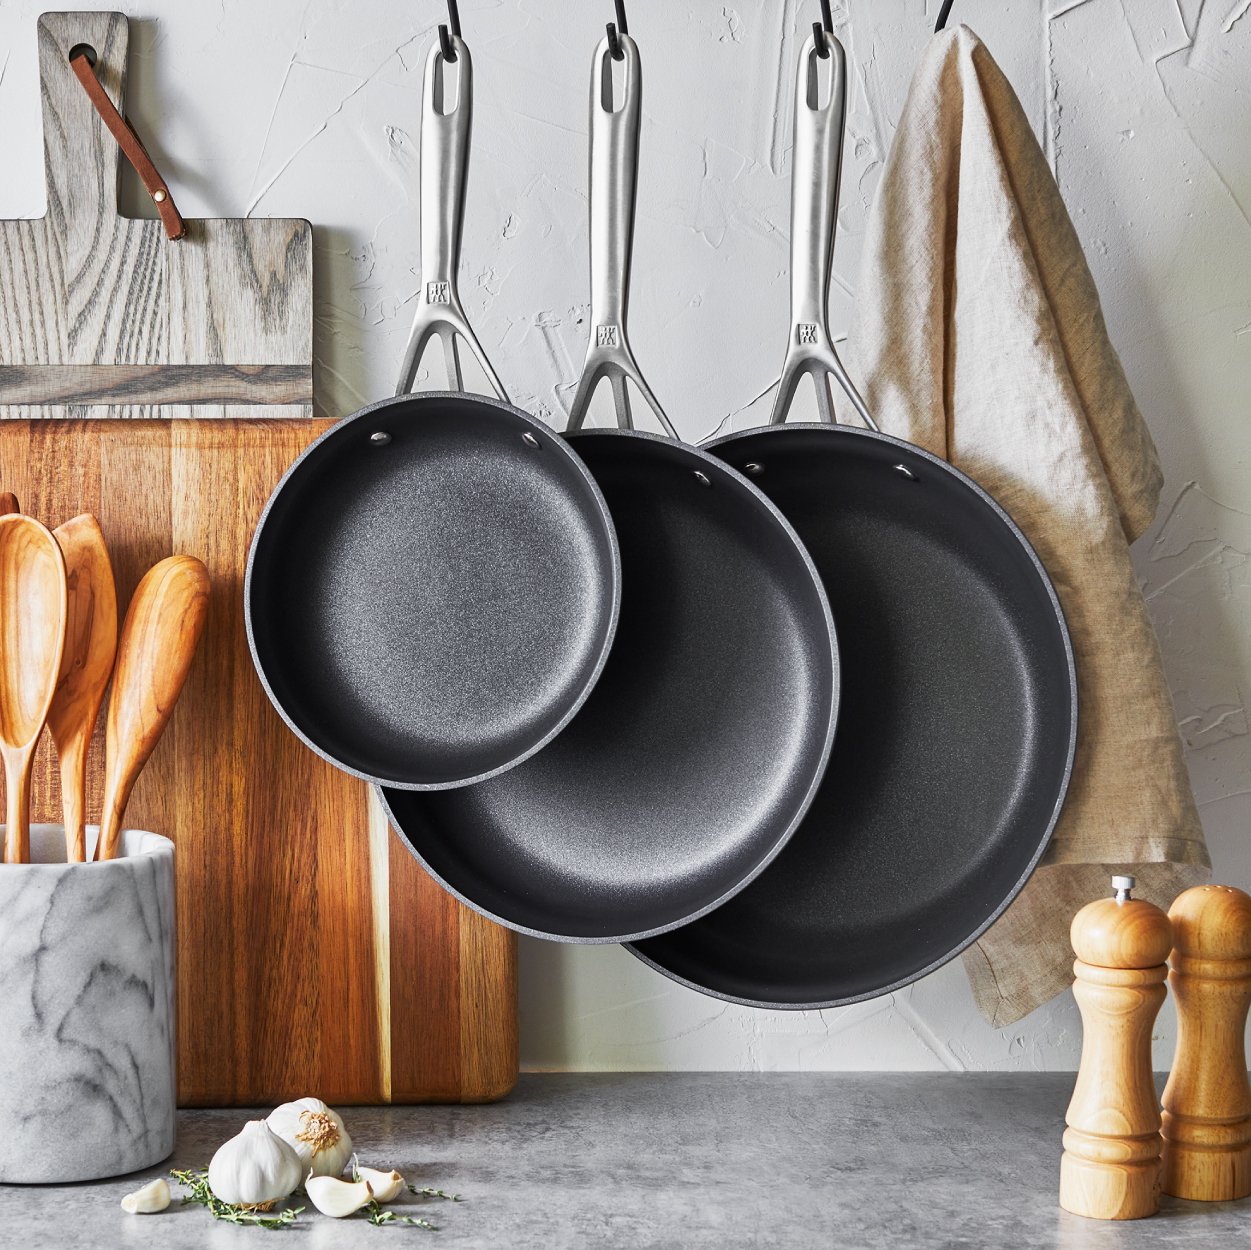 https://www.zwilling.com/on/demandware.static/-/Sites-zwilling-us-Library/default/dw0f642c56/images/product-content/masonry-content/zwilling/cookware/motion/ZW_Motion_Masonry_600-600_ZW_MotionMasonry_5.jpg